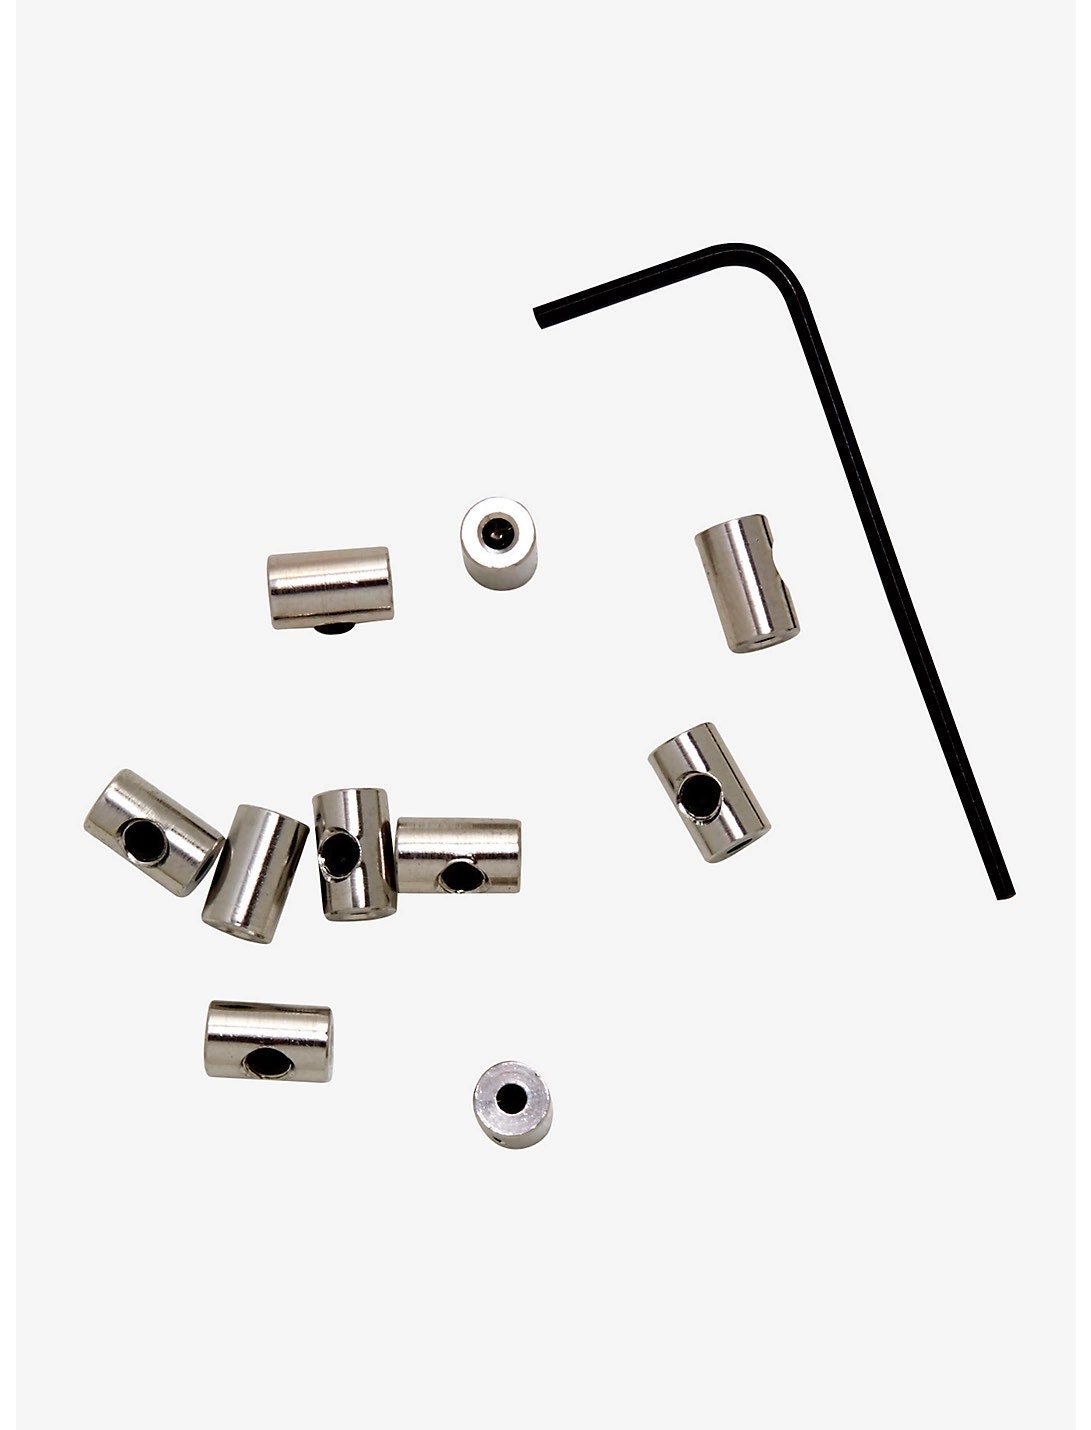 Locking Pin Backs // Pack of 10, 20, 40, or 100 // 6mmx5mm or